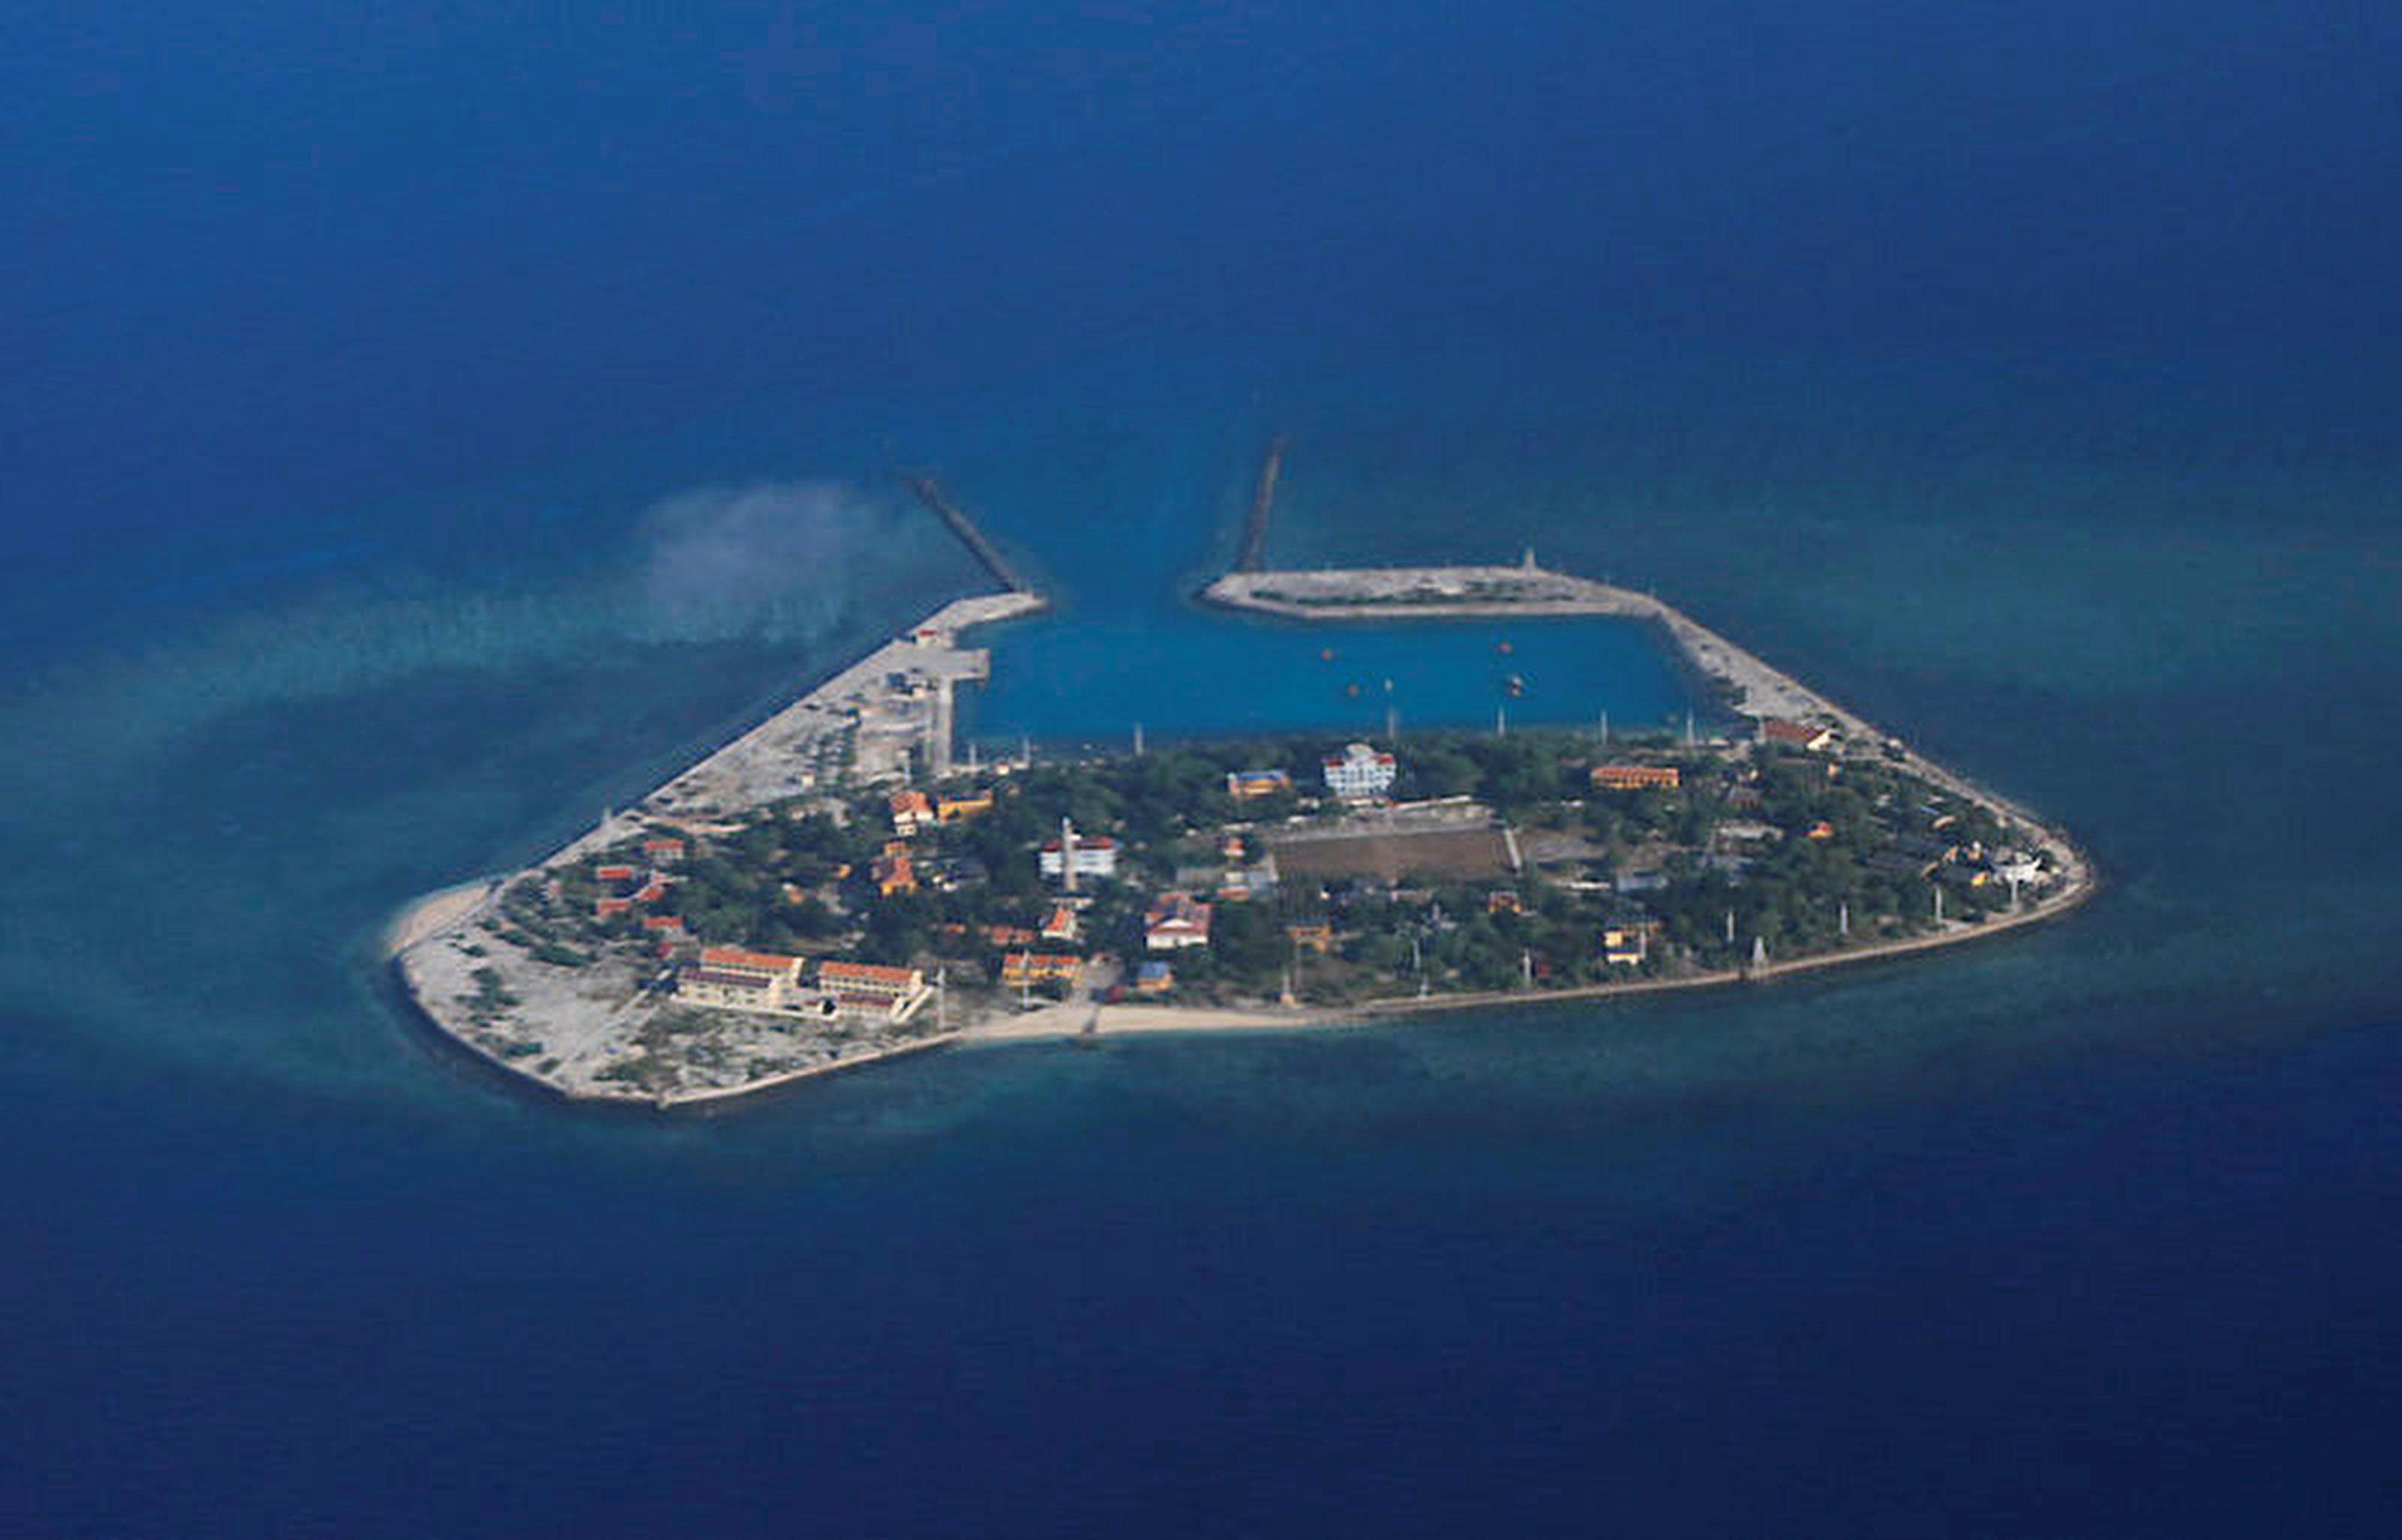 Vietnam controls more than two dozen disputed islands and reefs in the South China Sea. Photo: Reuters